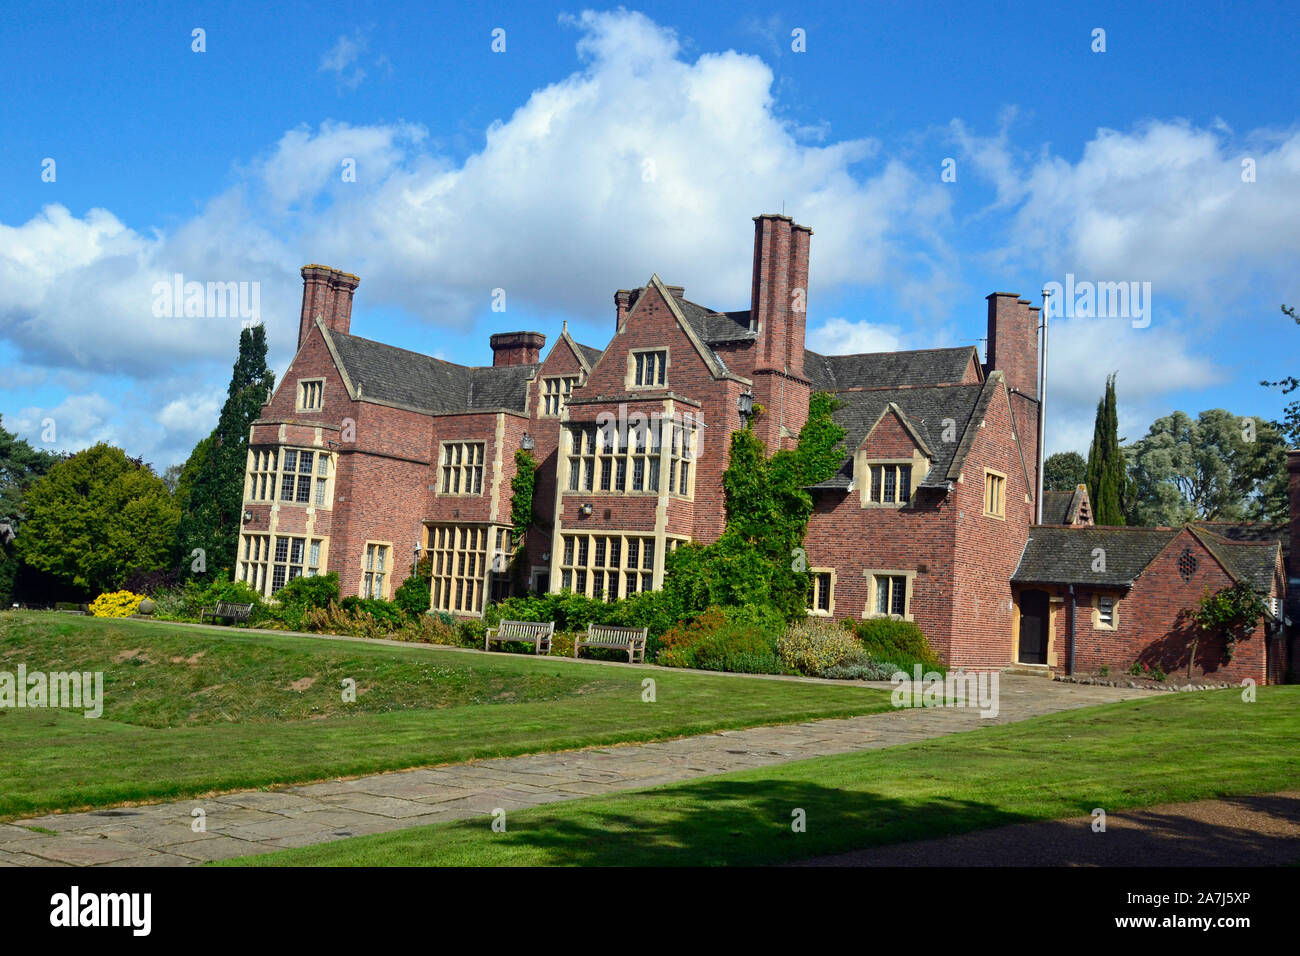 Manor House in the University of Leicester Botanic Garden, Leicester, Leicestershire, UK Stock Photo